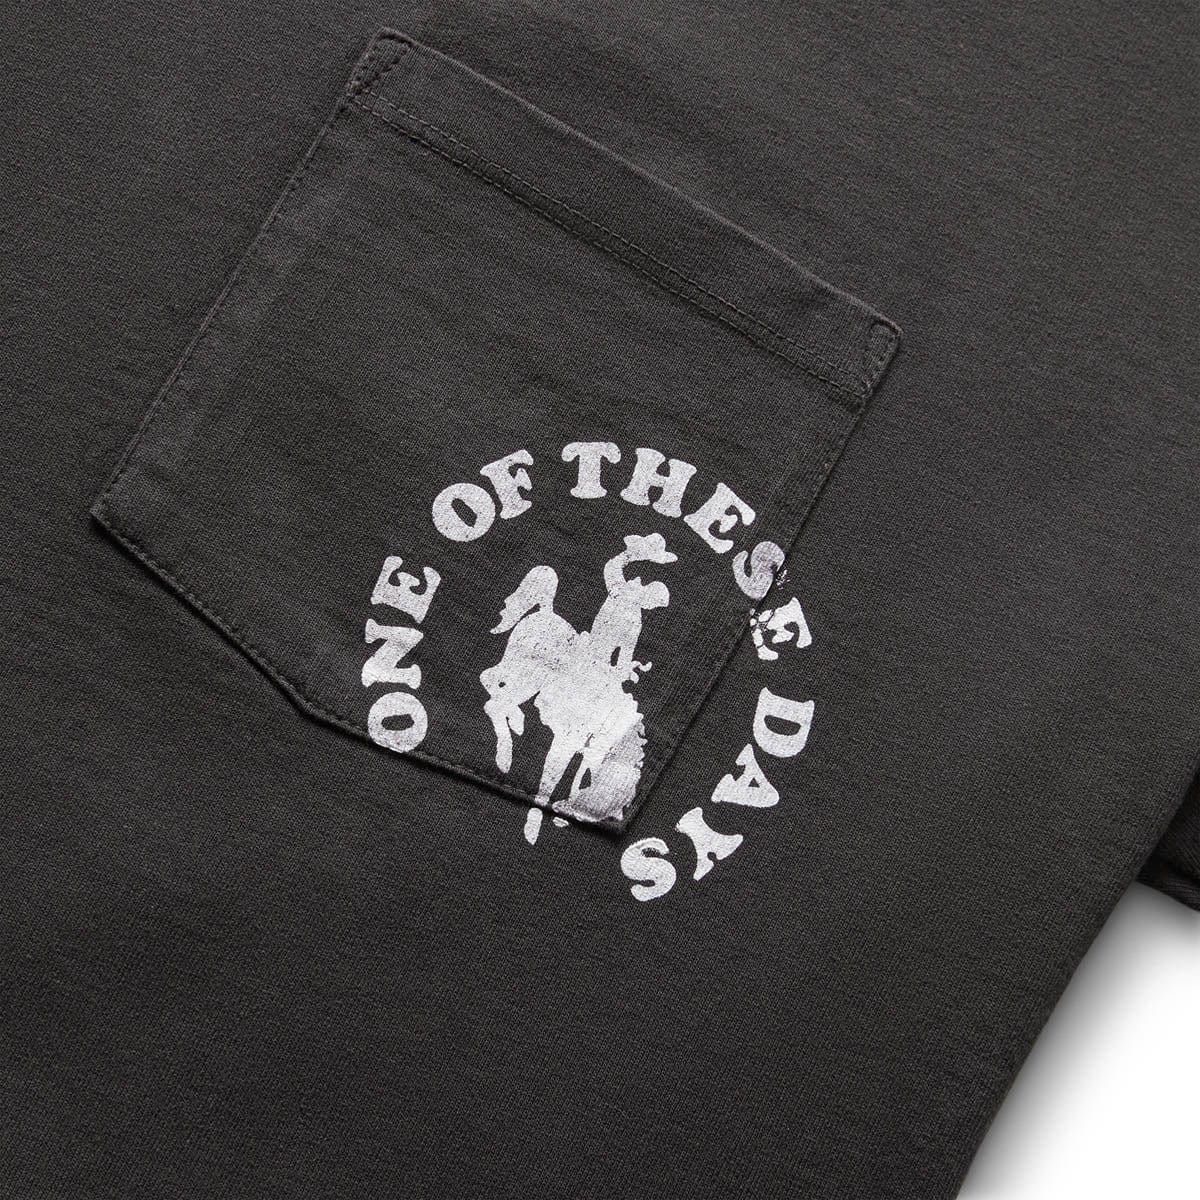 One Of These Days T-Shirts COWBOY HIPPIES TEE